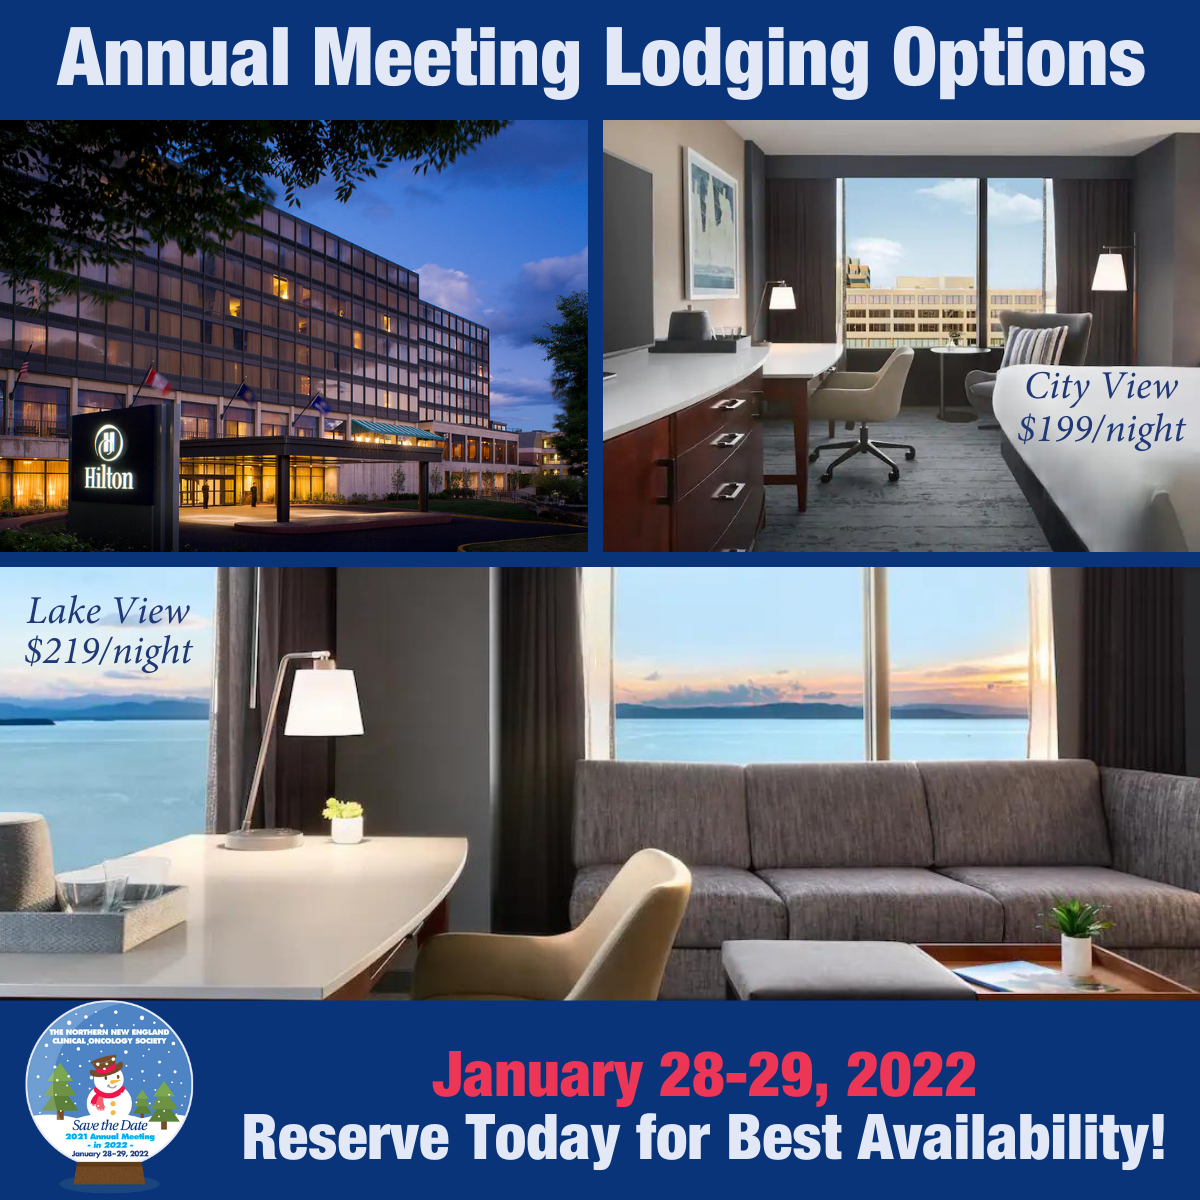 Annual Meeting Lodging Options - Reserve Today for Best Availability!